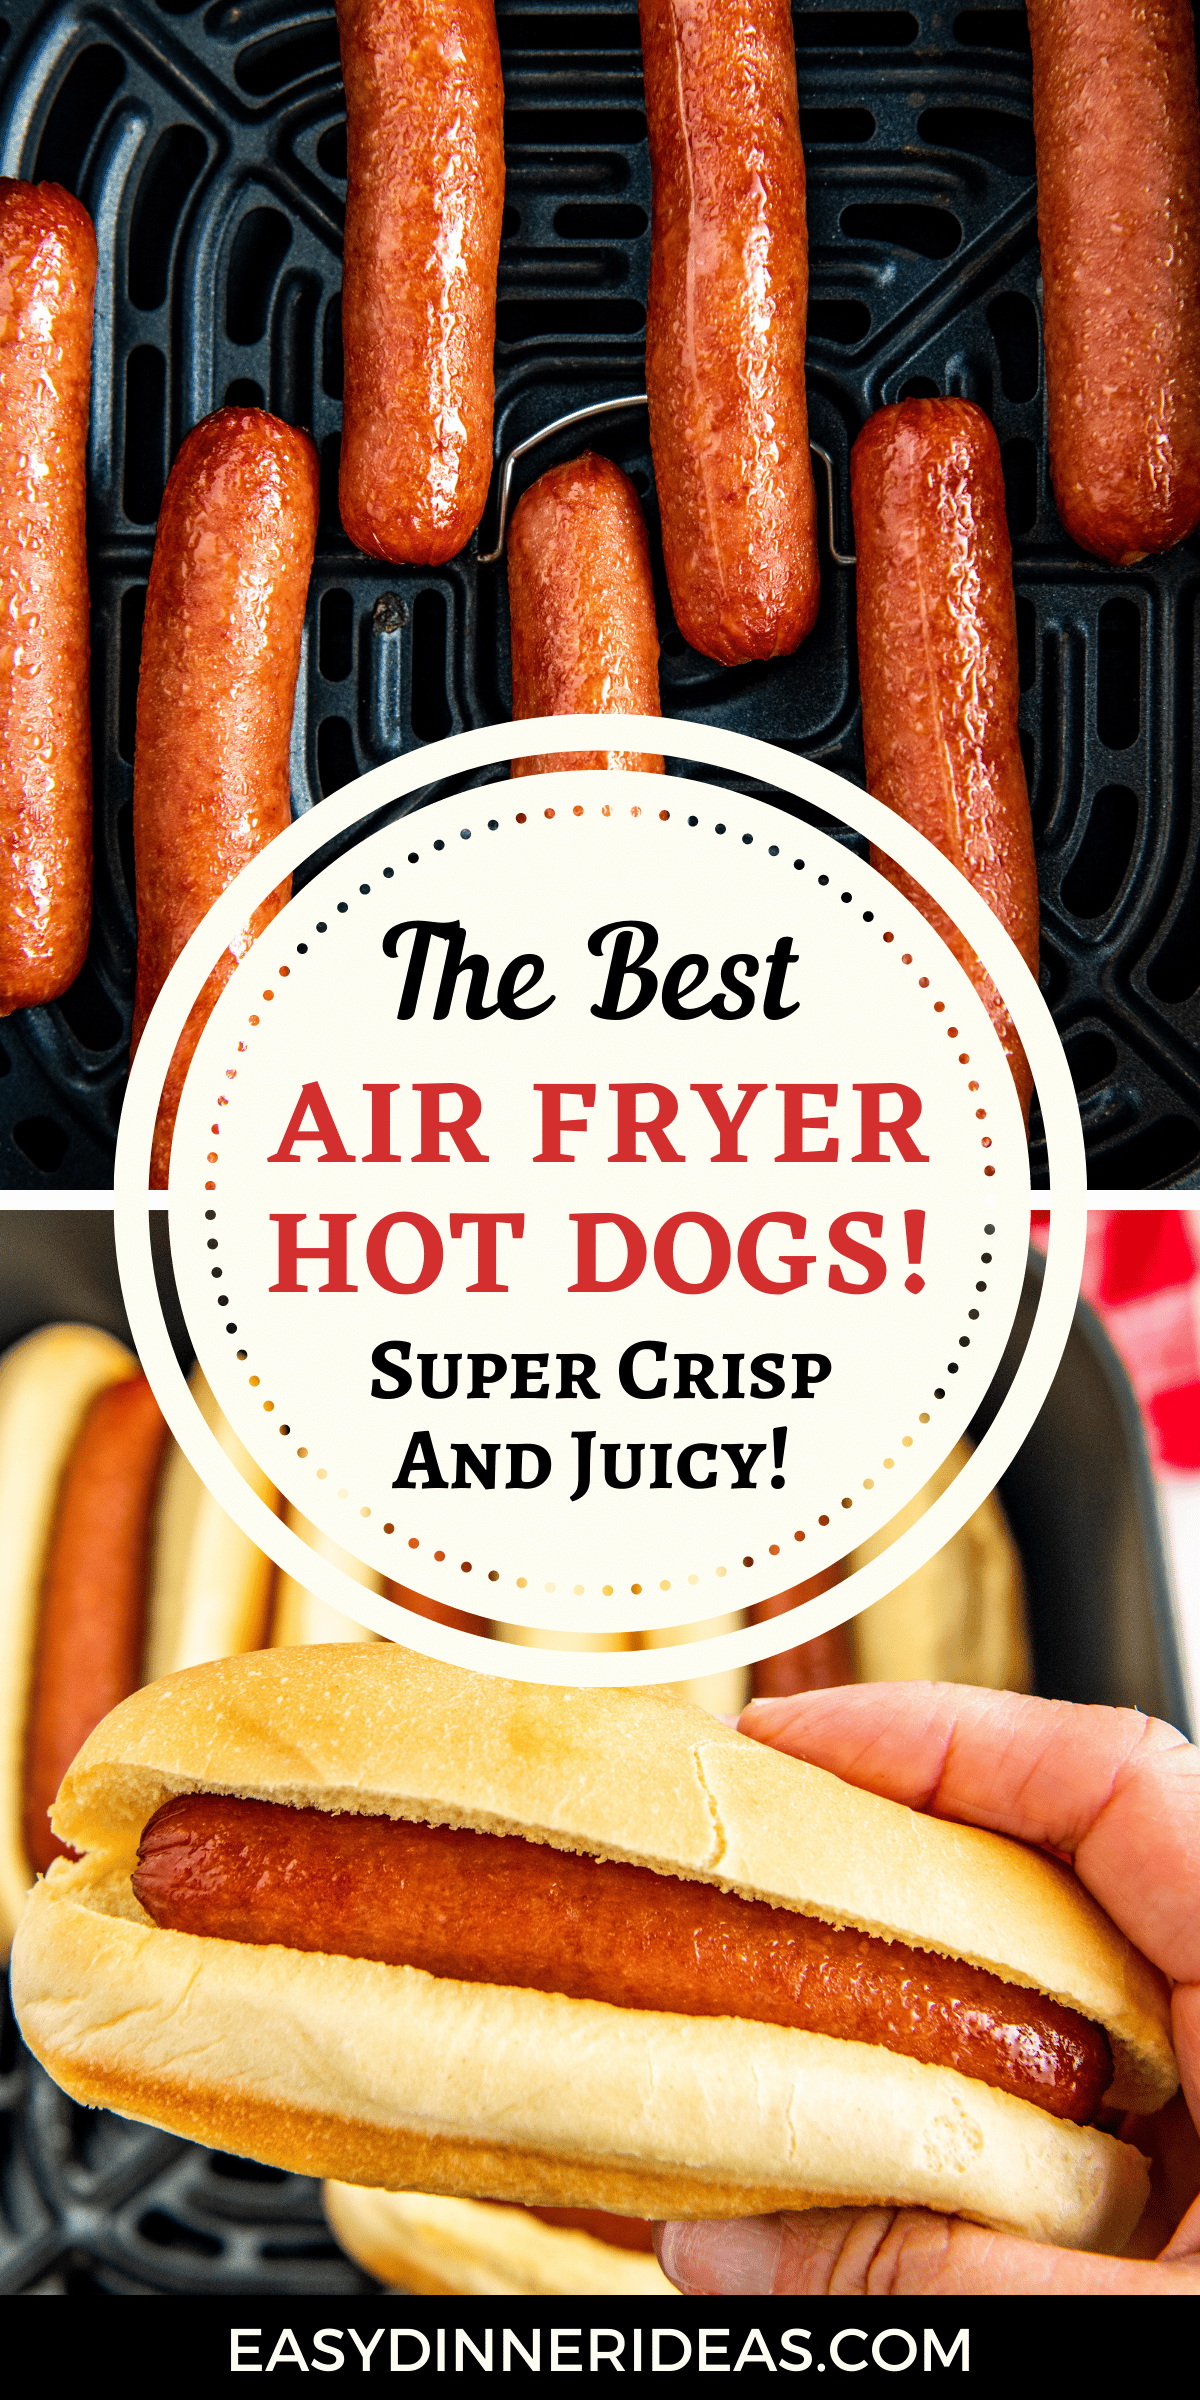 Air Fryer Hot Dogs | The Best Crispy & Juicy Hot Dogs You Can Make!